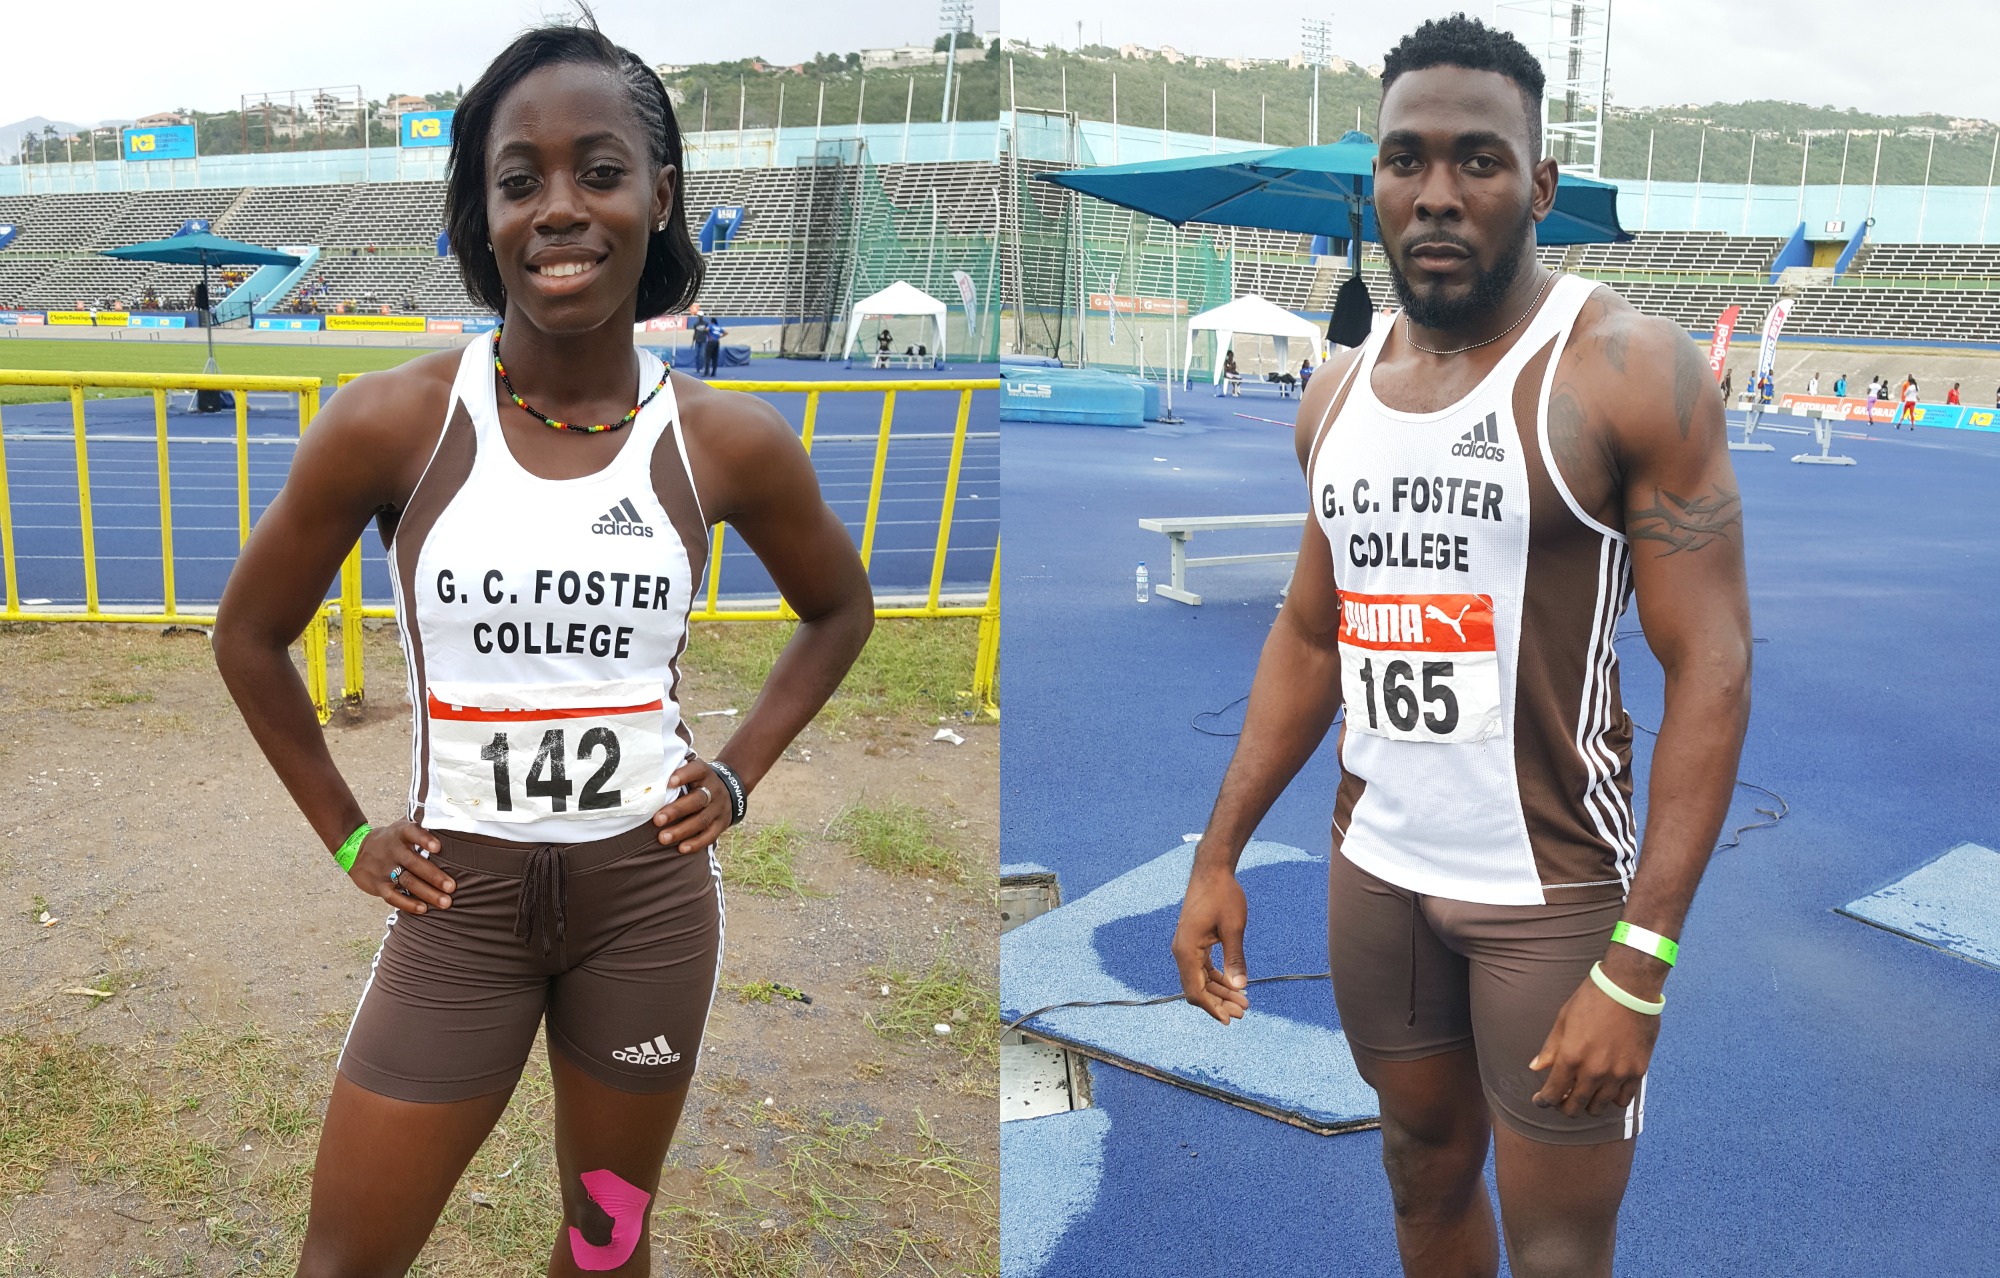 Forbes, Clarke win 100m finals for GC Foster to lead at Intercol Champs